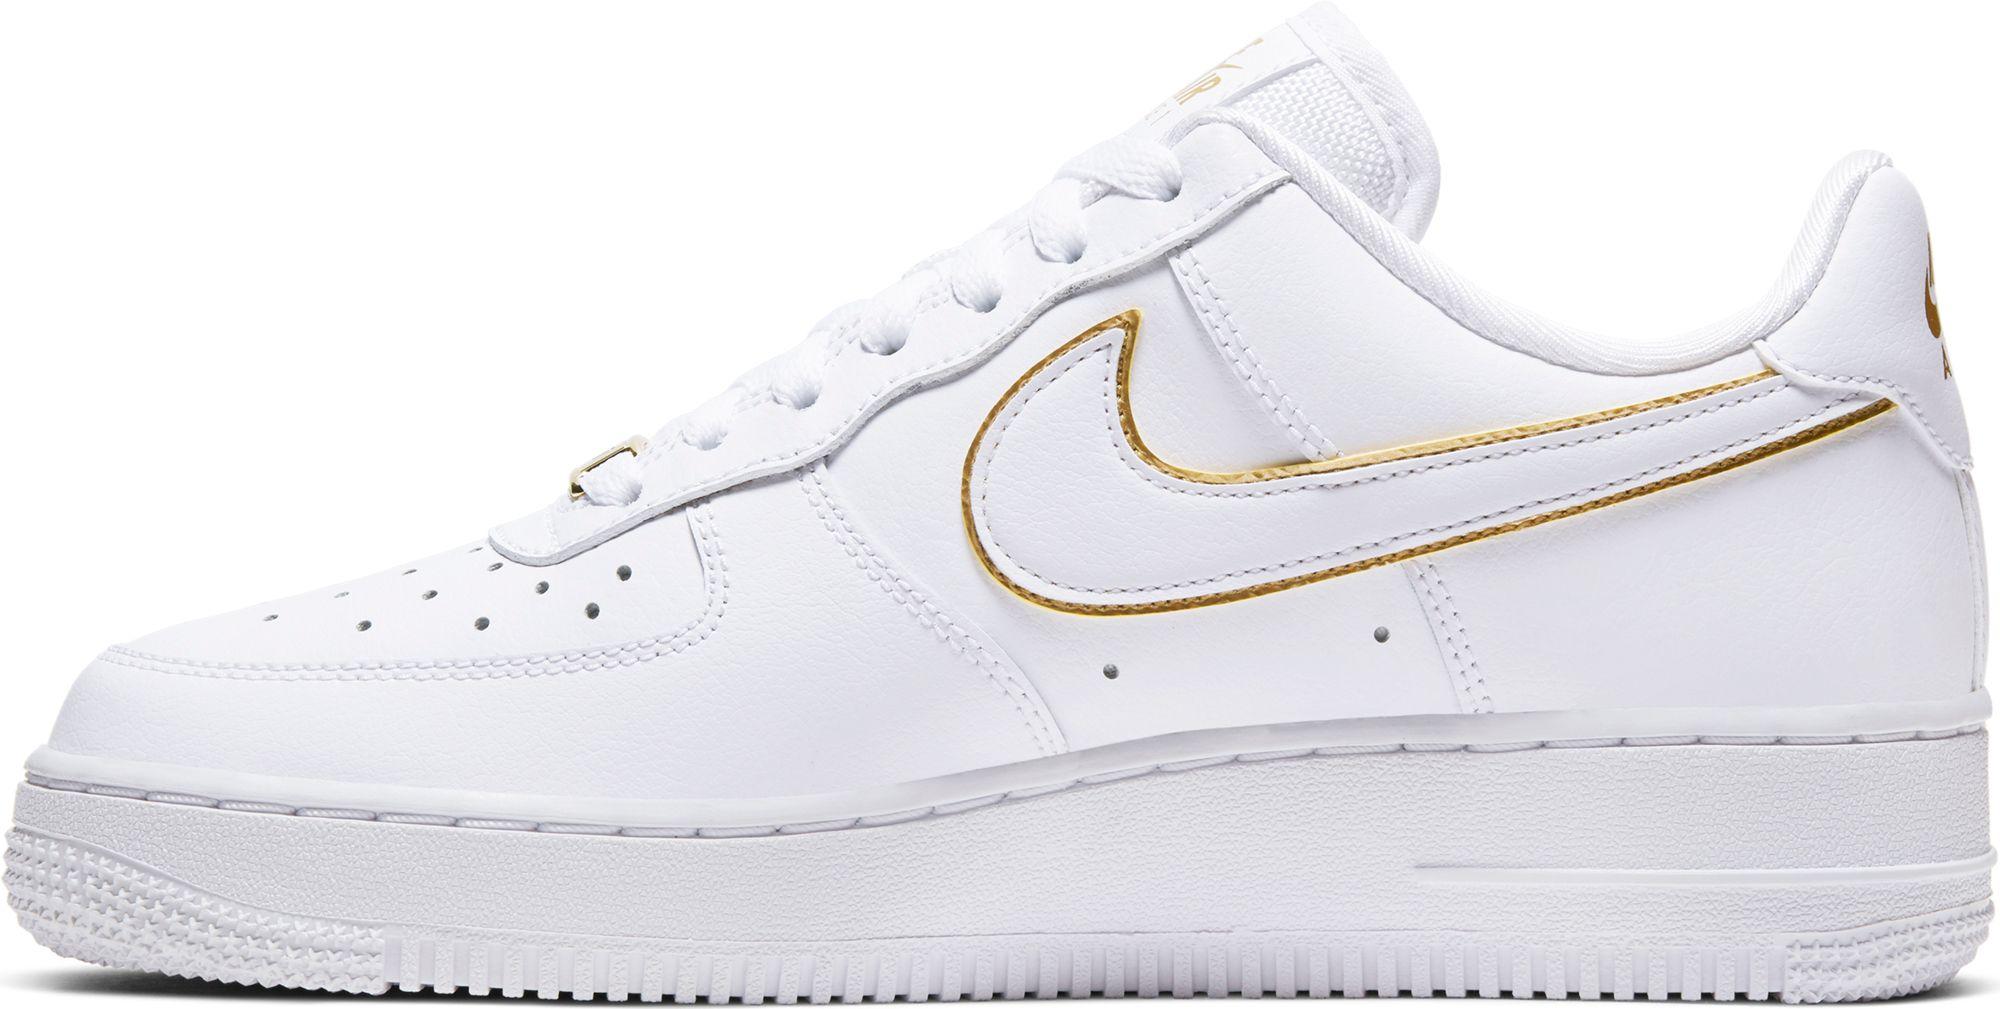 Nike Leather Air Force 1 '07 Essential Shoes in White/Metallic/Gold (White)  | Lyst